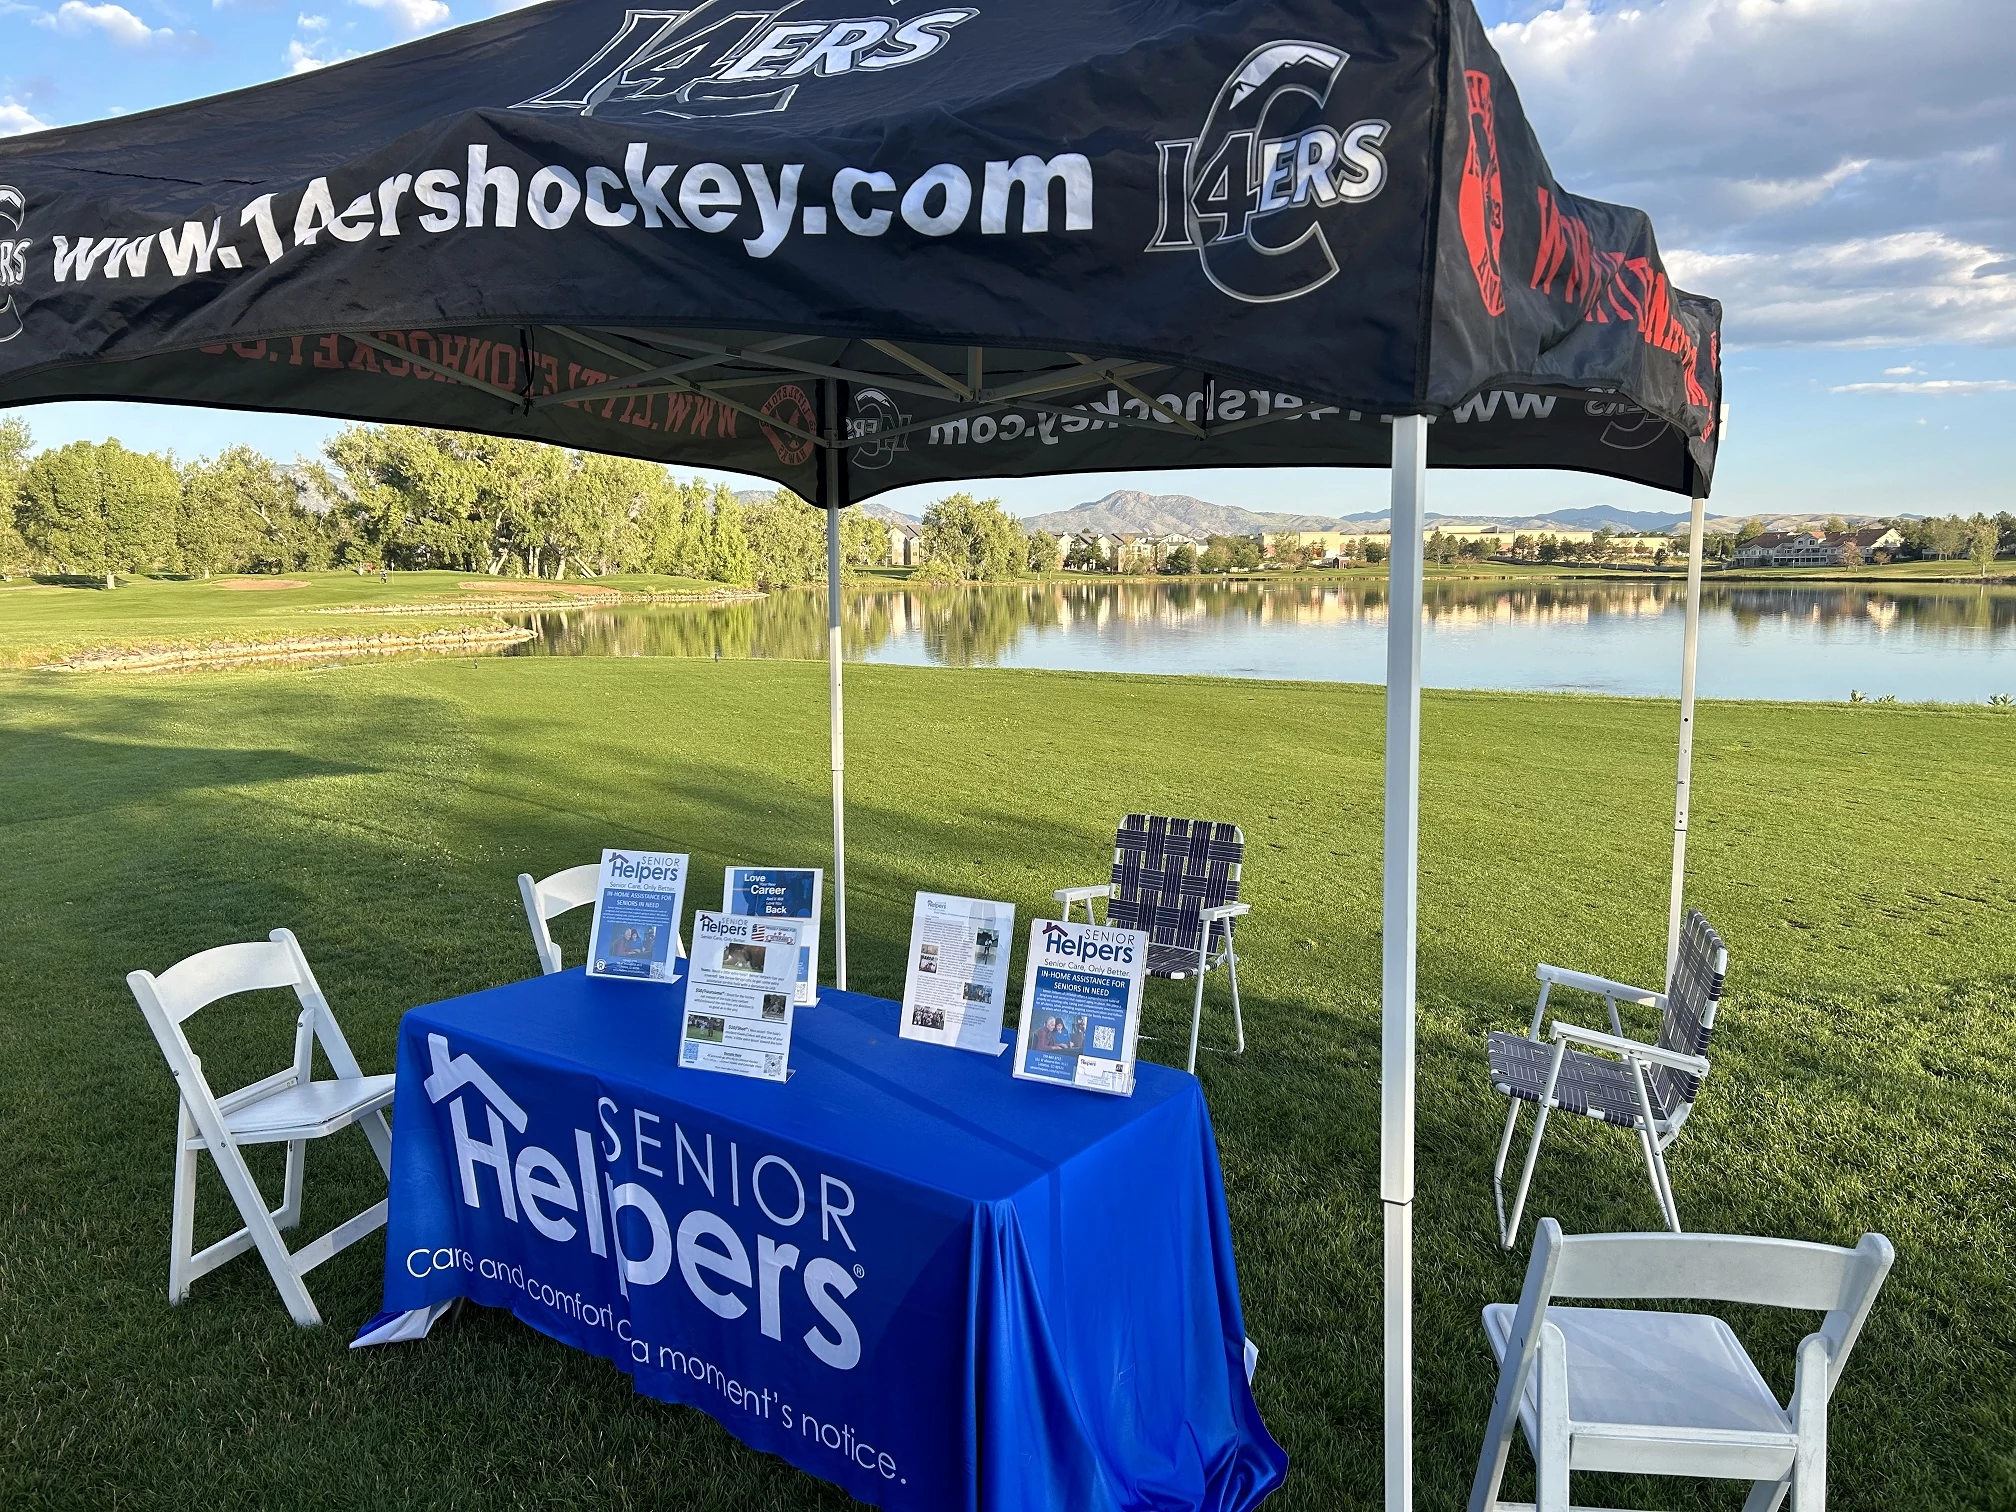 Senior Helpers of Littleton was proud to be a Gold Level supporter the 8th Annual golf tournament for the benefit of the Littleton Hawks and Colorado 14ers youth hockey clubs.